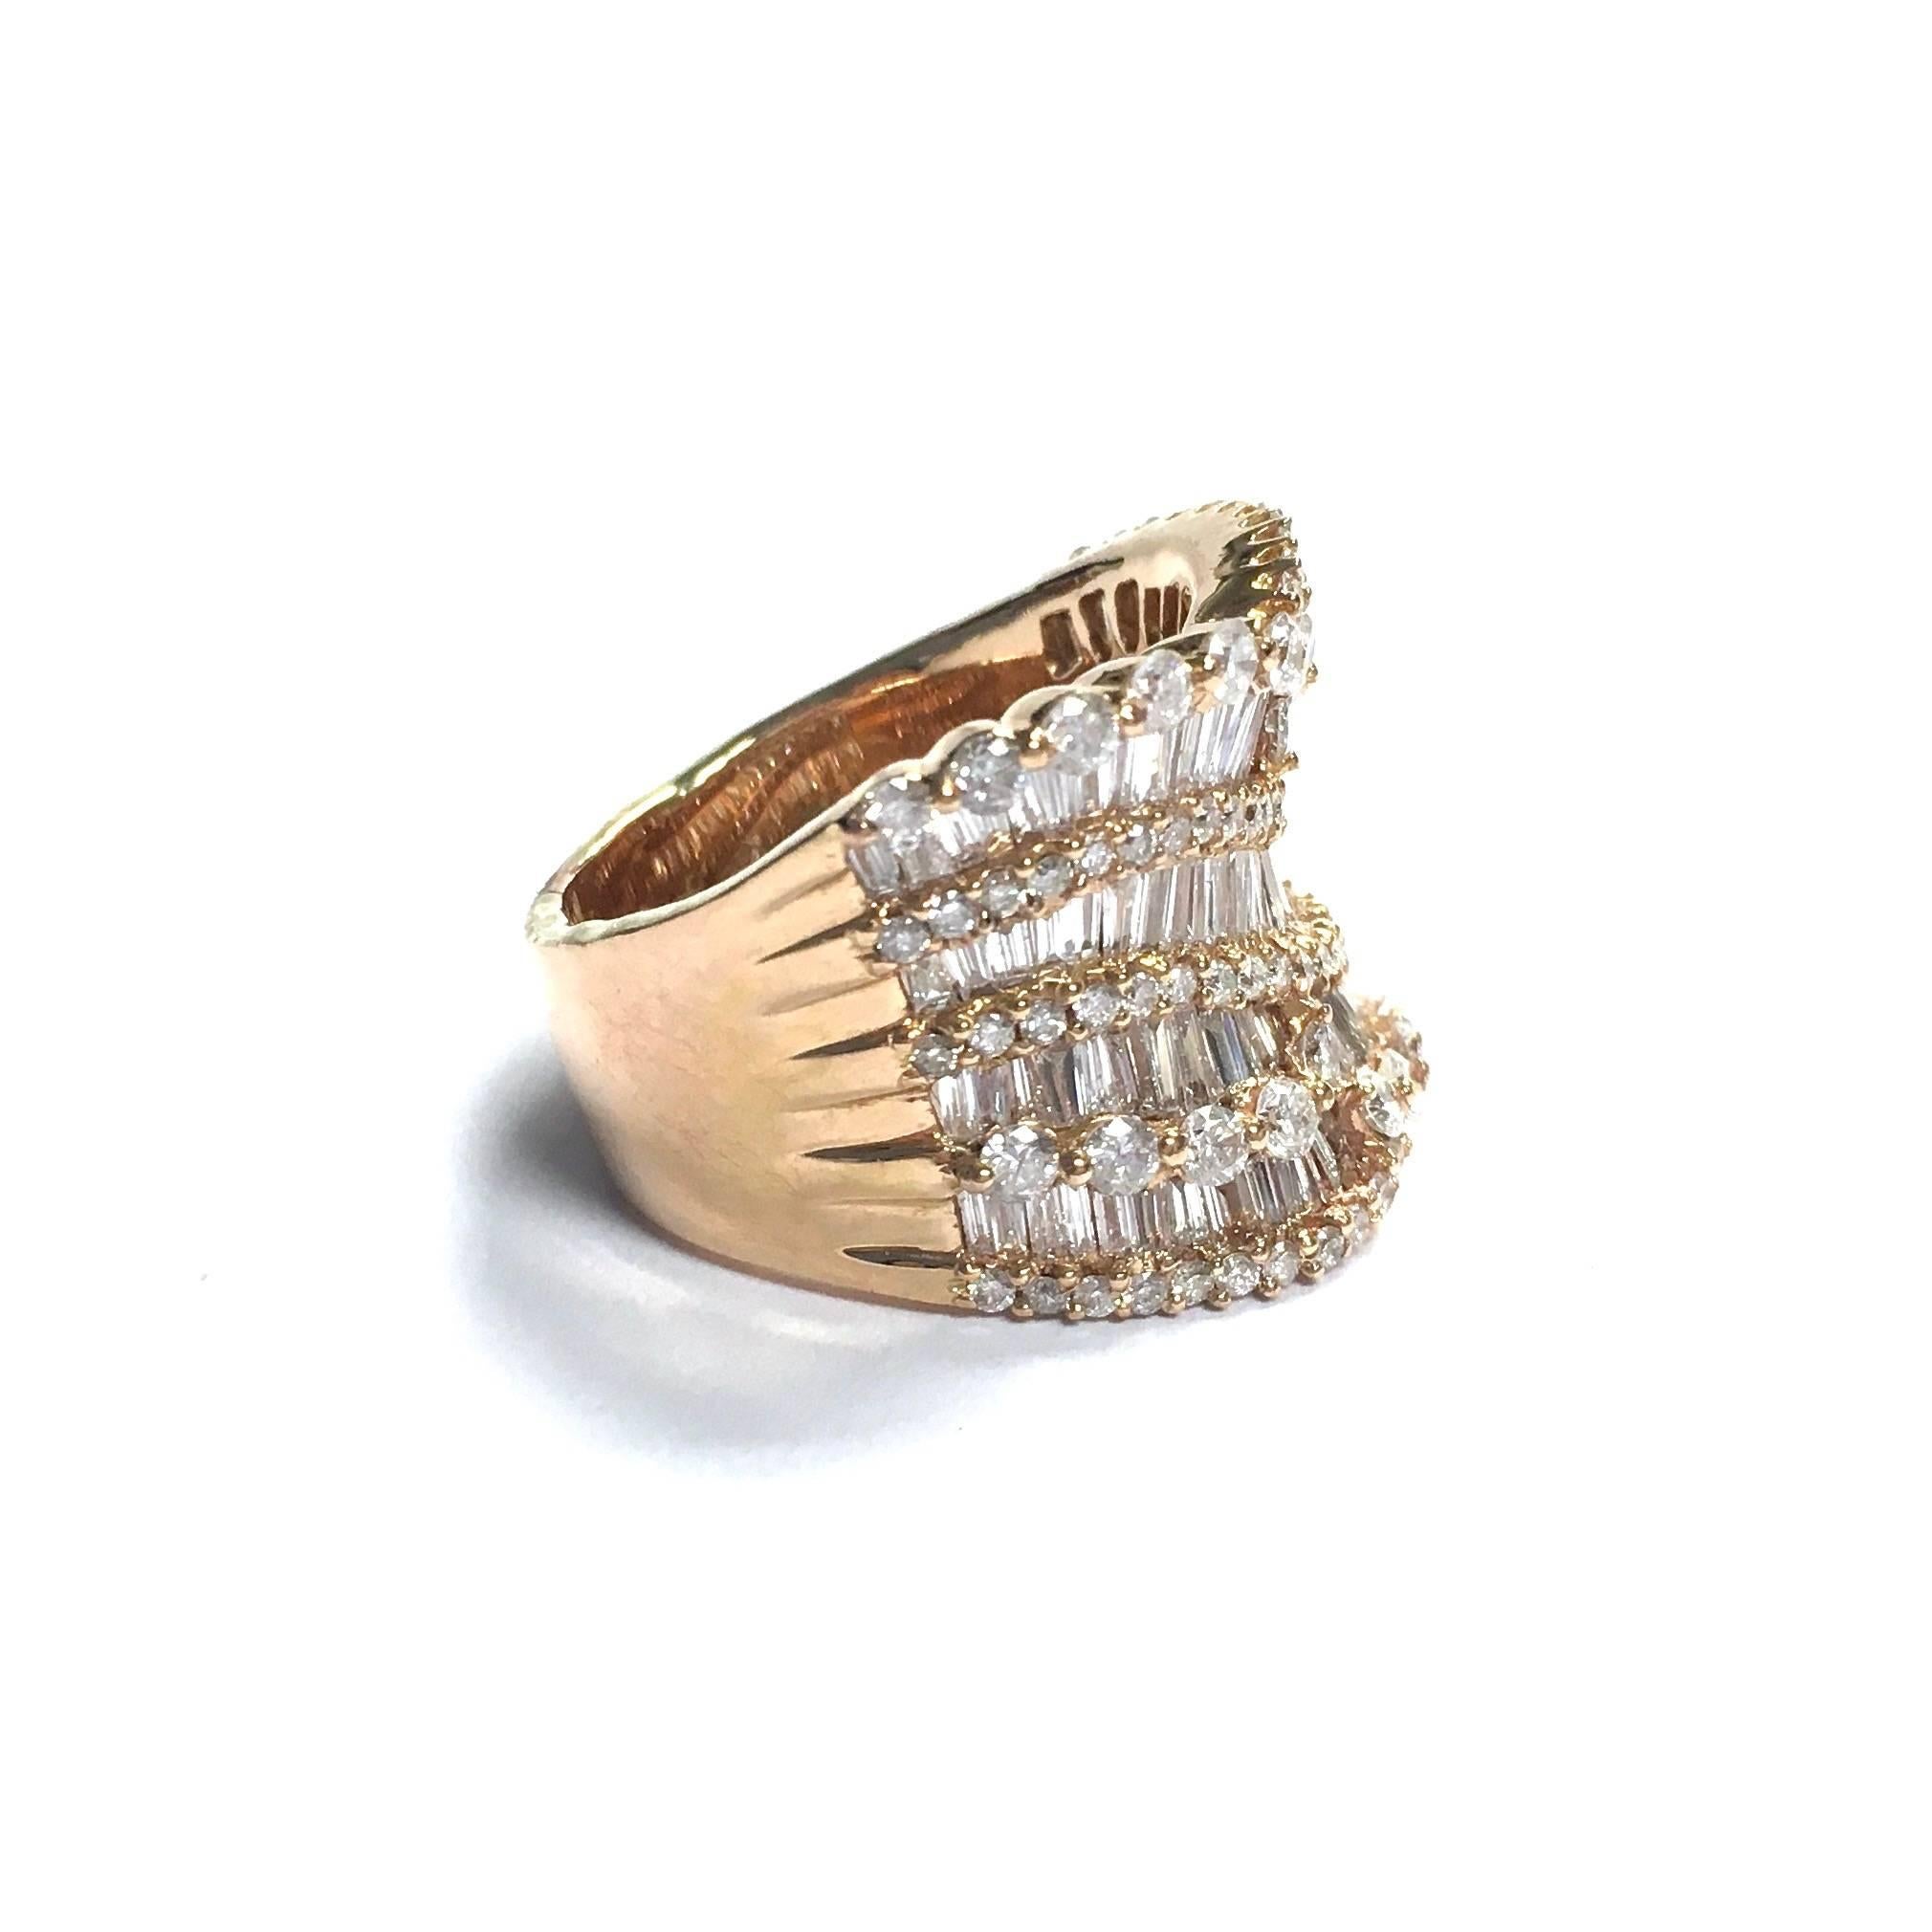 Gorgeous 18K rose gold ballerina style diamond ring. Featuring a concave design on the front set with curved ribbons of baguette and round brilliant cut diamonds. 
Approximate total diamond weight: 4.5 ct, Color: F-G Clarity: SI
18 mm  (11/16")